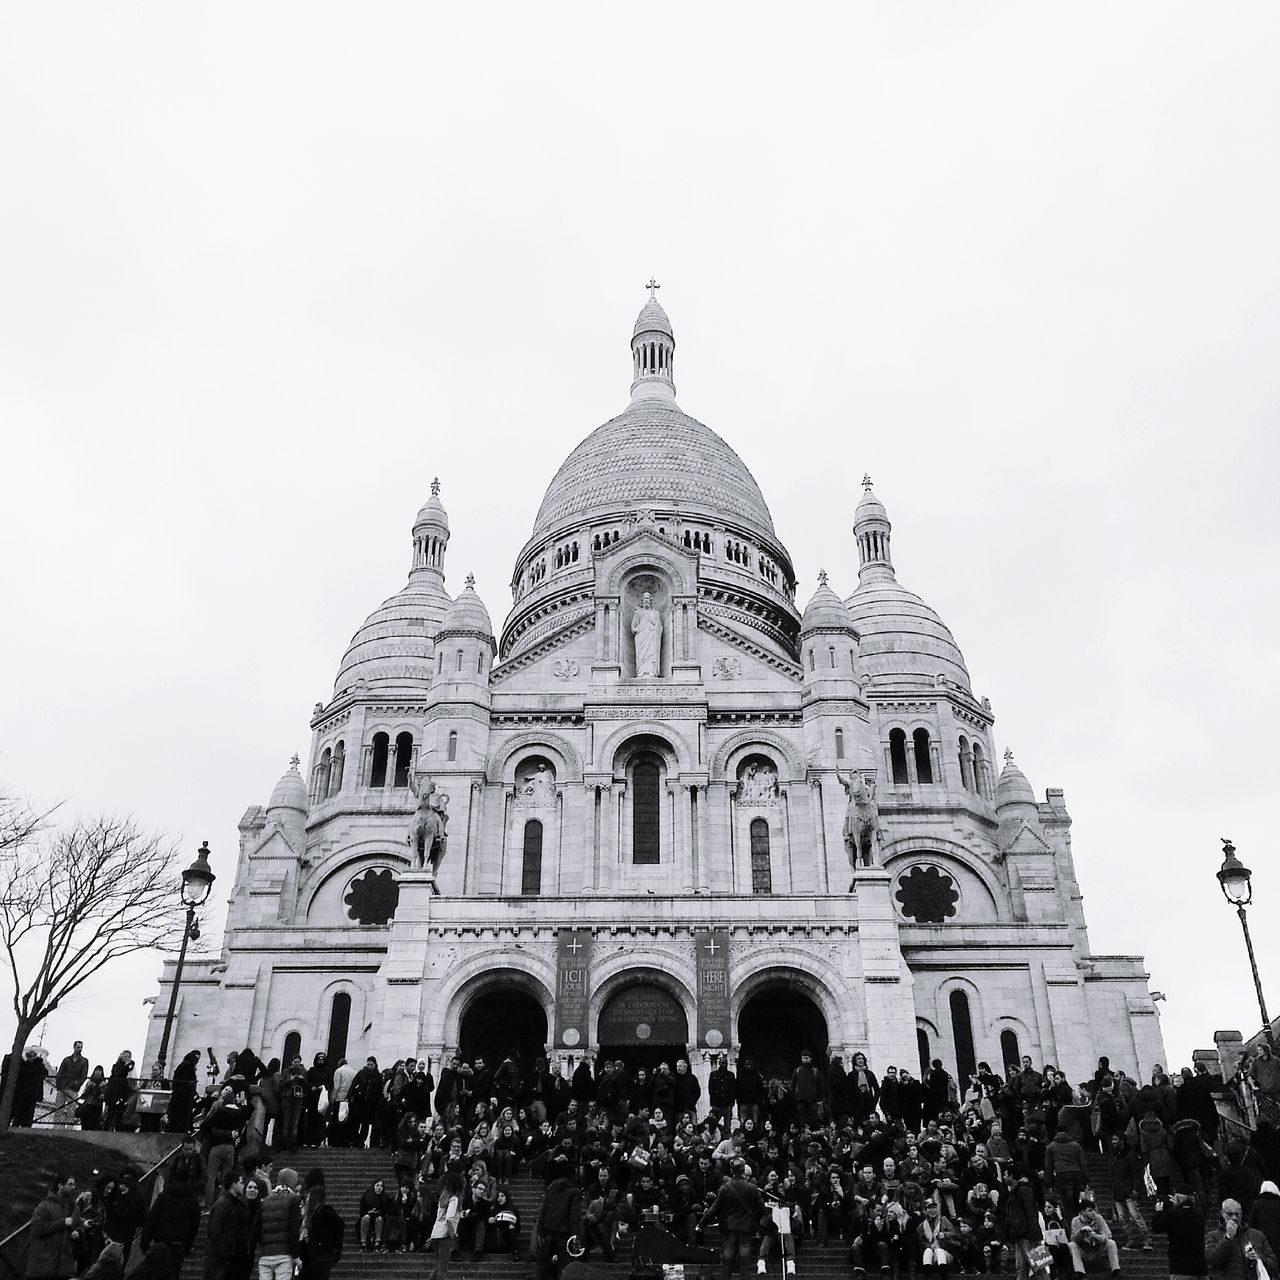 architecture, place of worship, religion, dome, built structure, famous place, large group of people, building exterior, tourism, spirituality, travel destinations, international landmark, arch, history, travel, tourist, clear sky, church